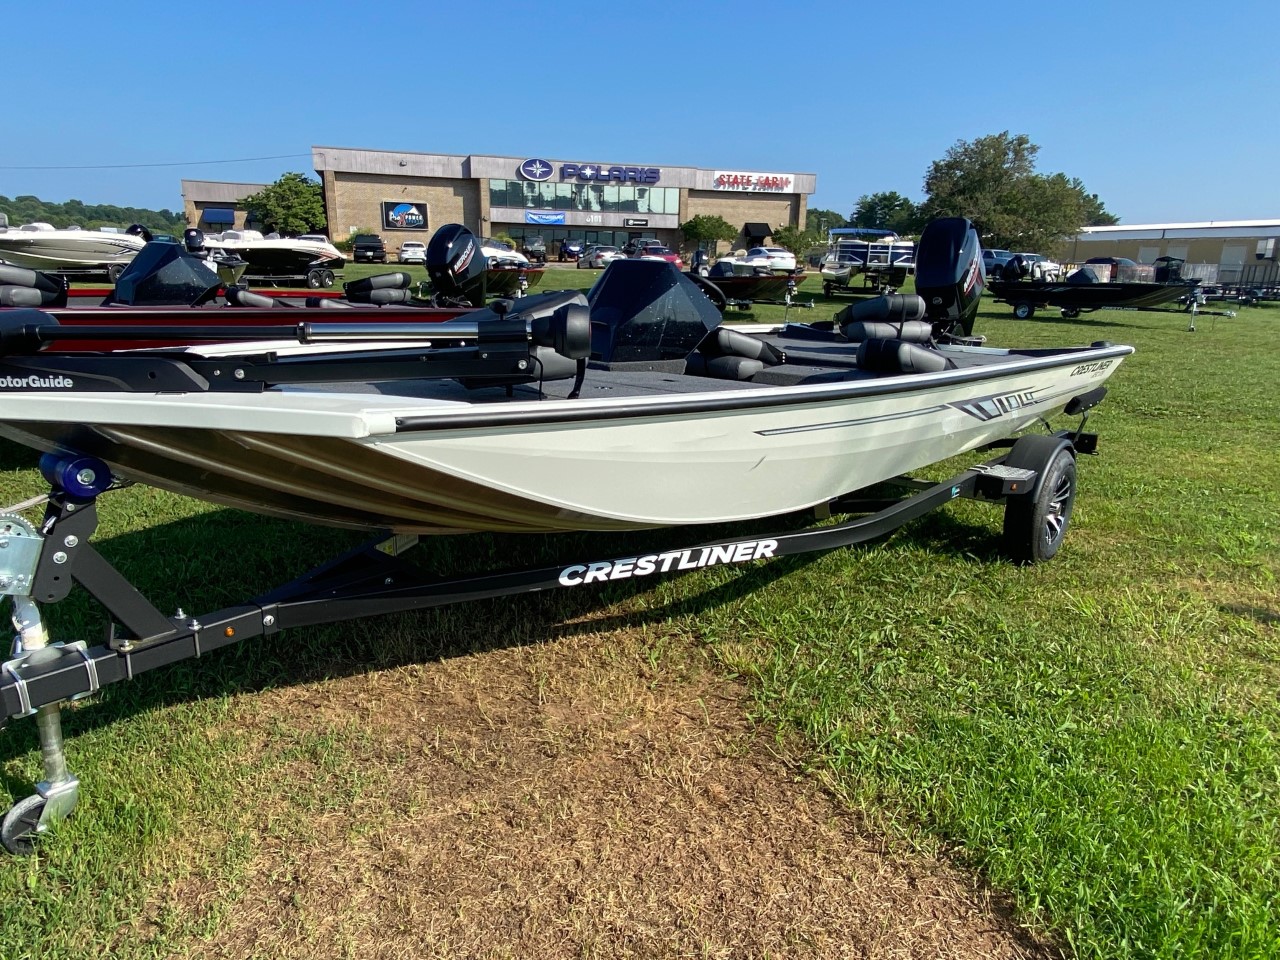 2022 Crestliner XFC 17 Fishing boat for sale in College Dale, TN - image 1 